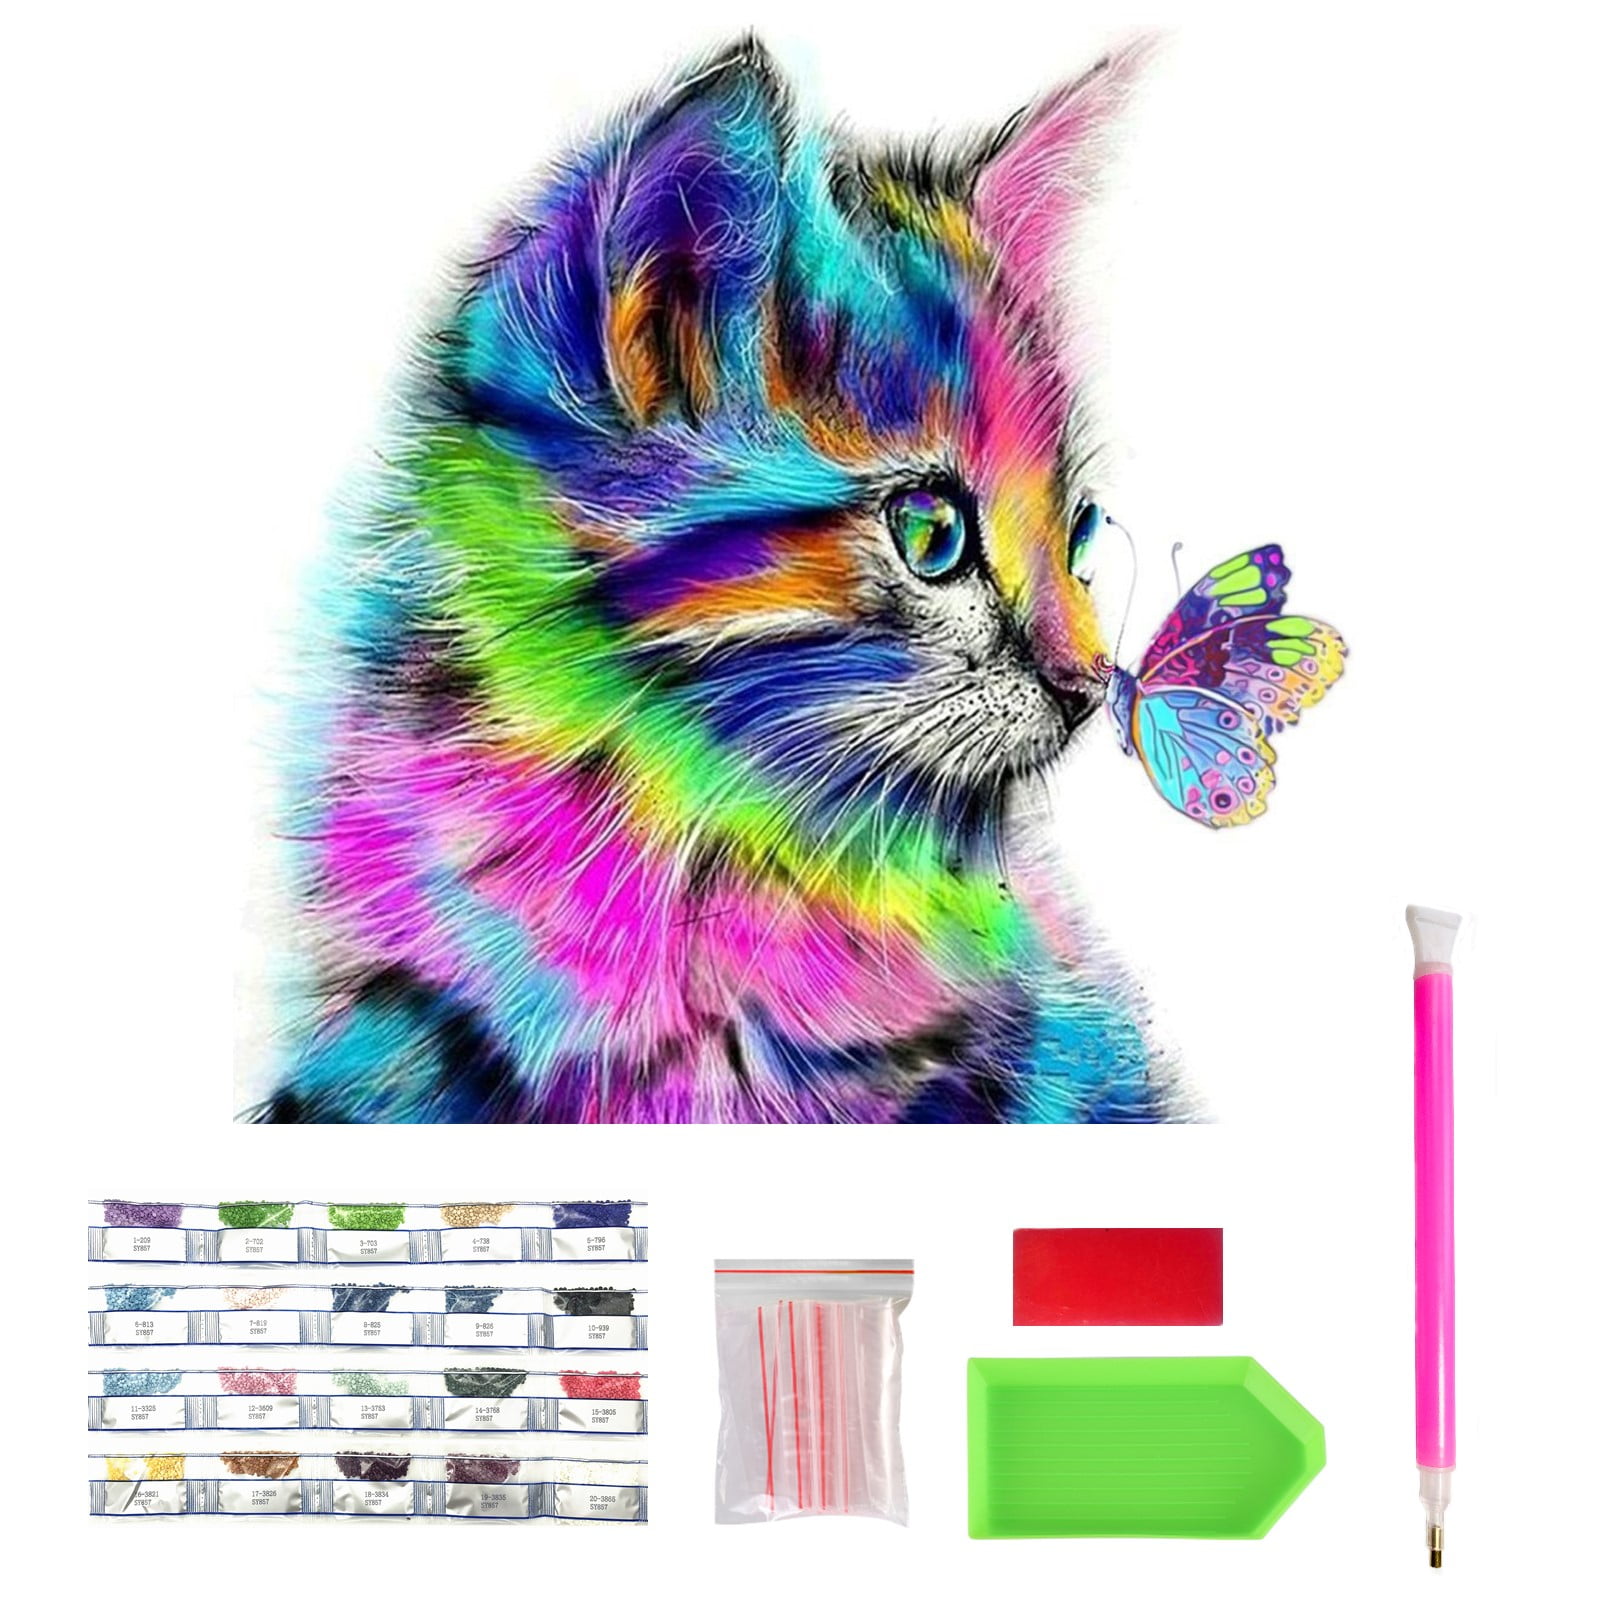  TOCARE Large 5D Diamond Painting Kits for Adults16x20Inch  Animal Round Full Drill Embroidery Dotz Kit Home Wall Art Decor,Magic cat :  Arts, Crafts & Sewing